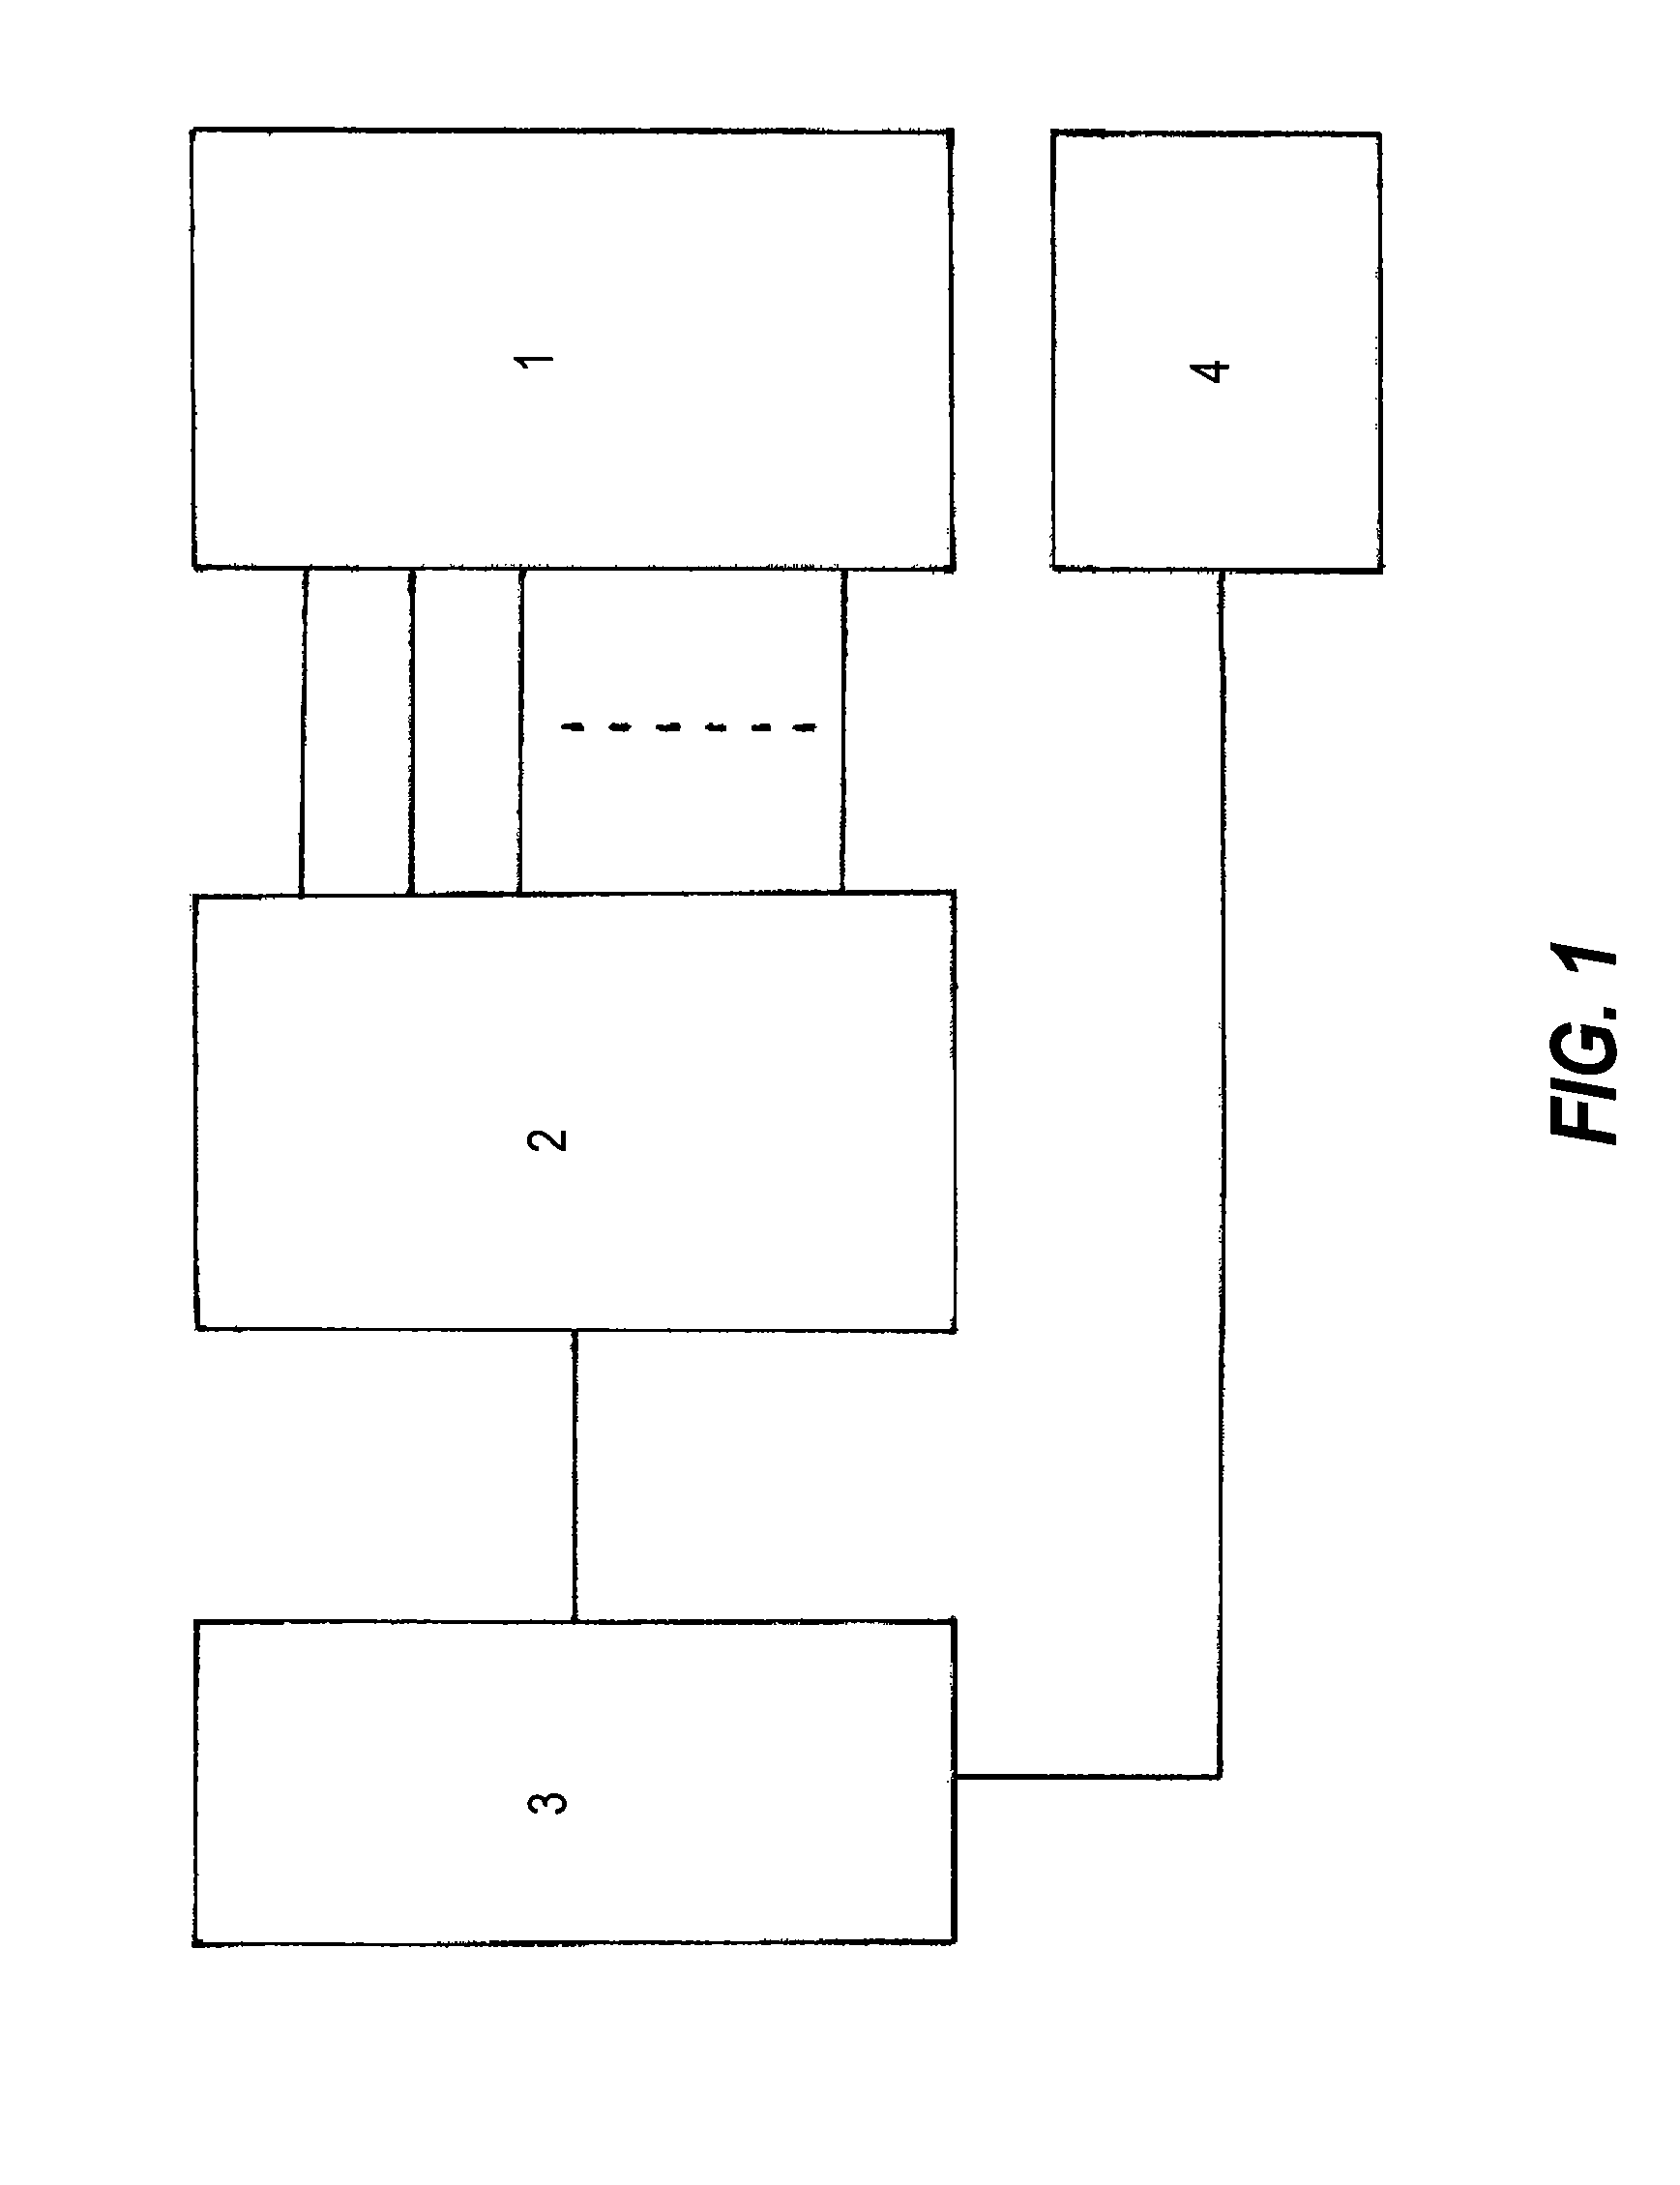 Microwave heating apparatus and method for whole-body or regional heating